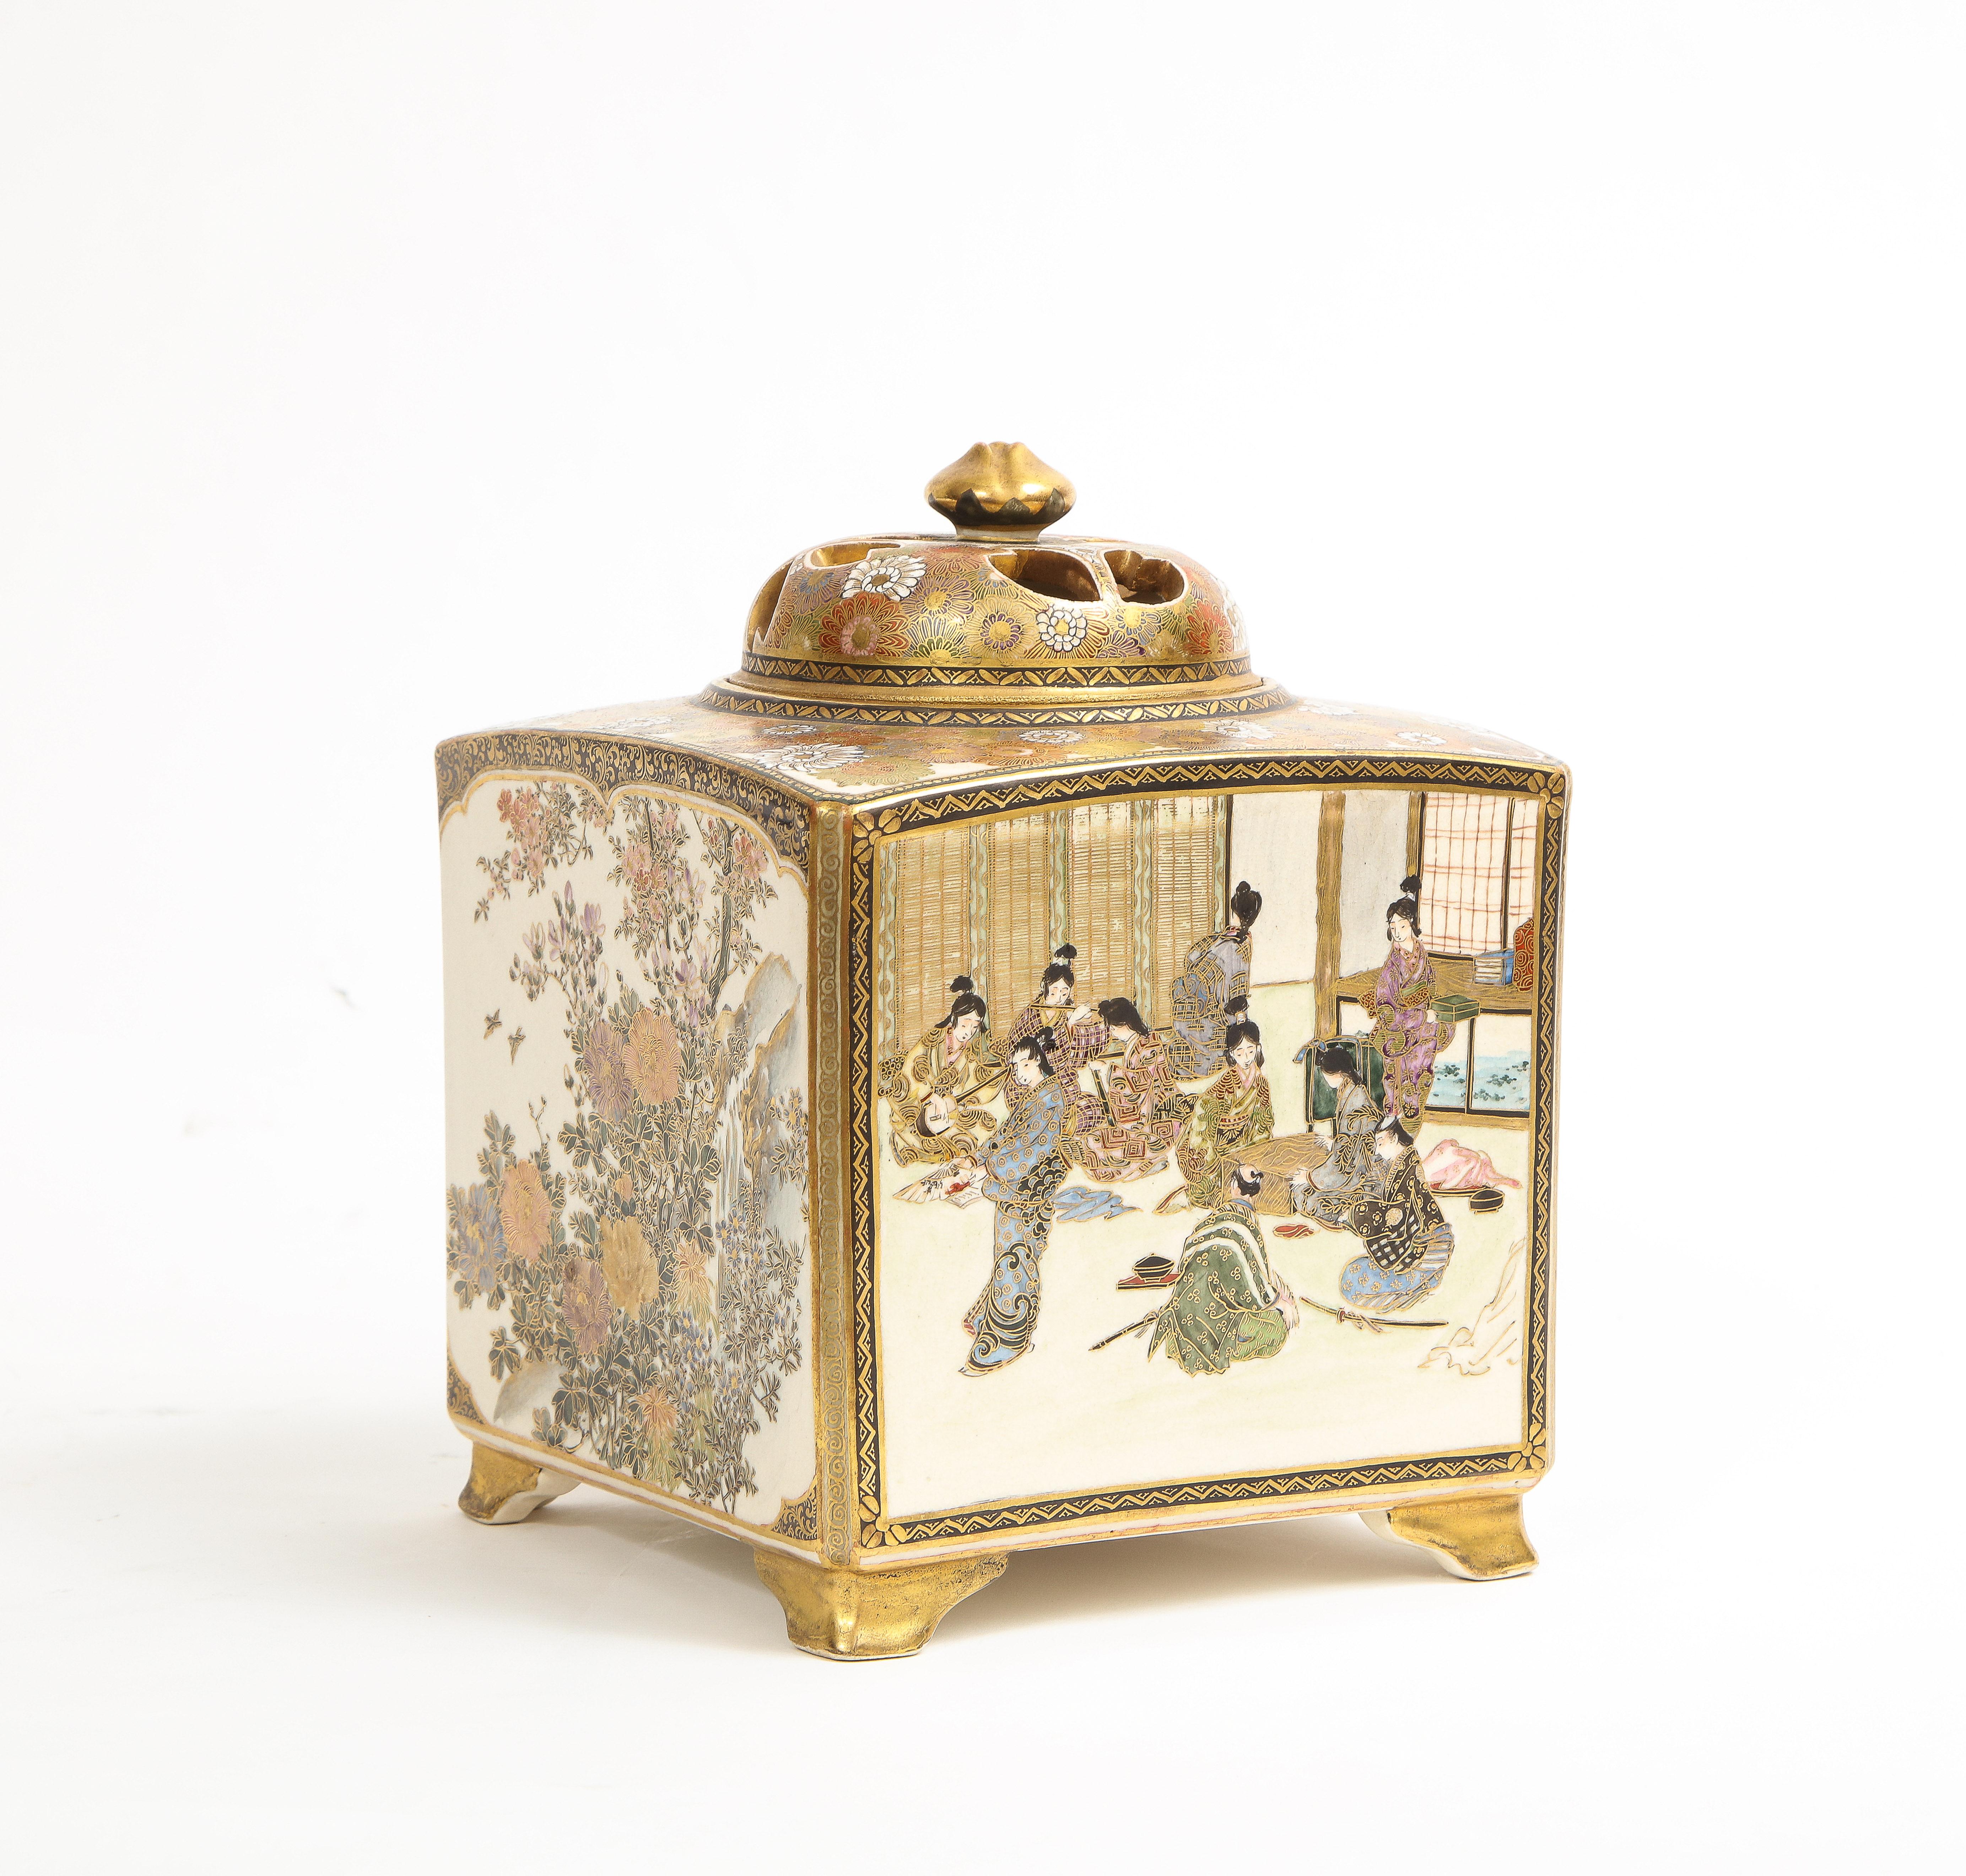 A Japanese Meiji Period (1868-1912).Large Satsuma Square Censer And Cover, Mark 1